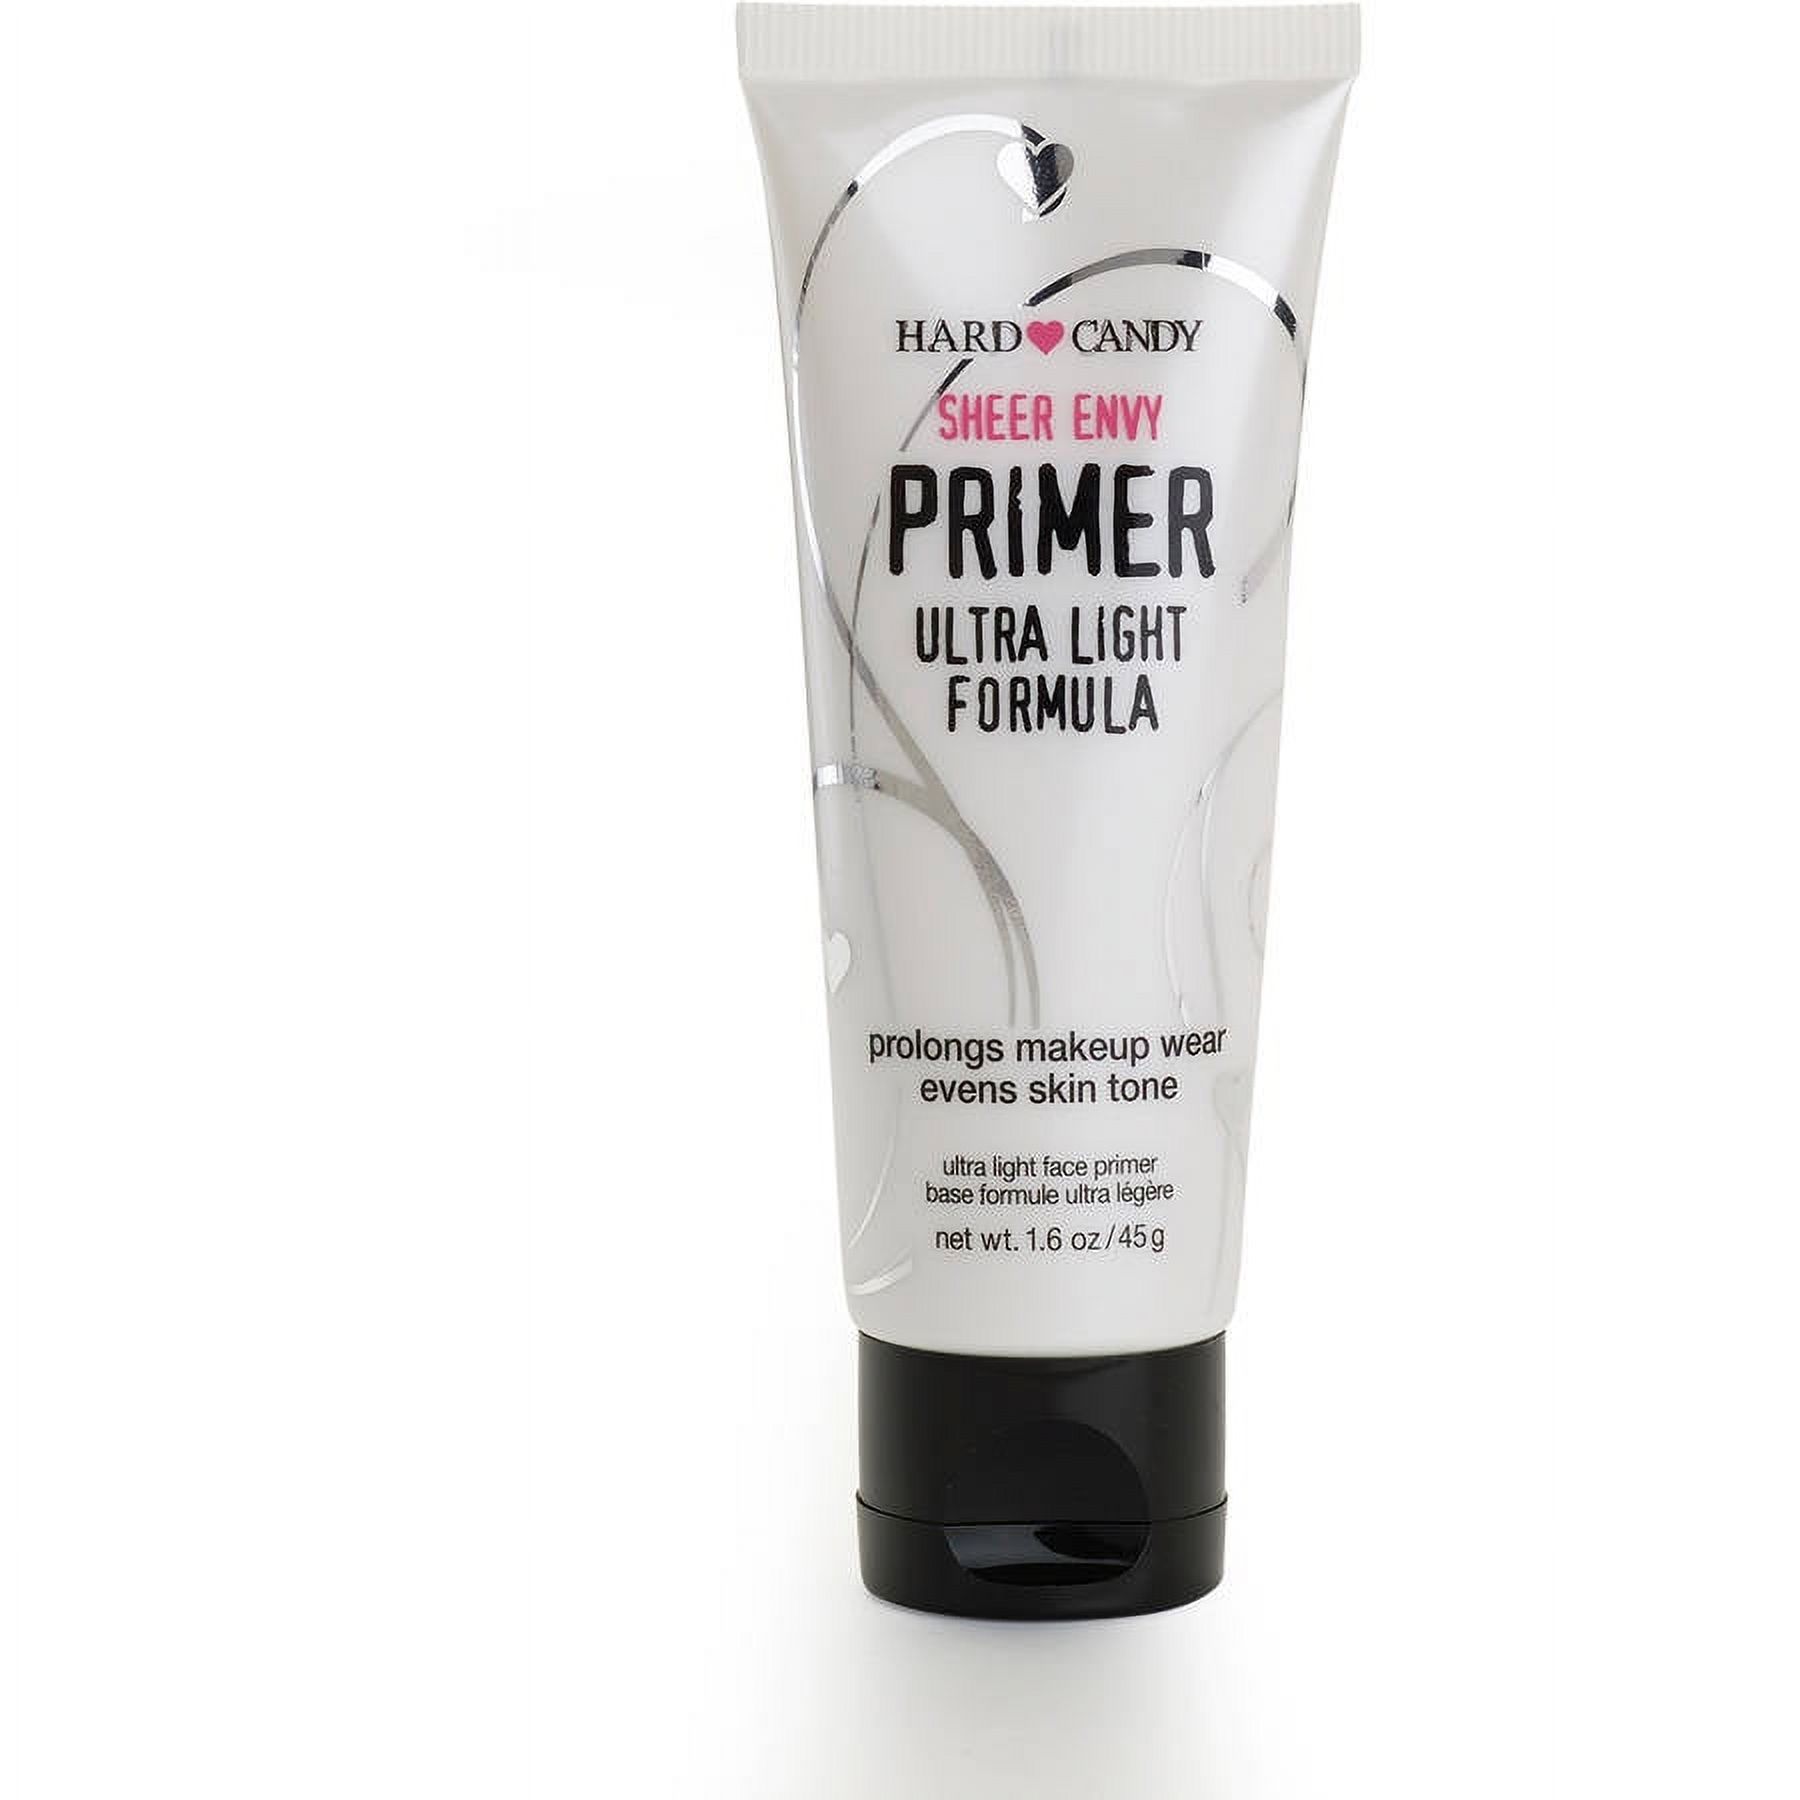 Hard Candy Sheer Envy Skin Perfecting Face Primers - image 1 of 1